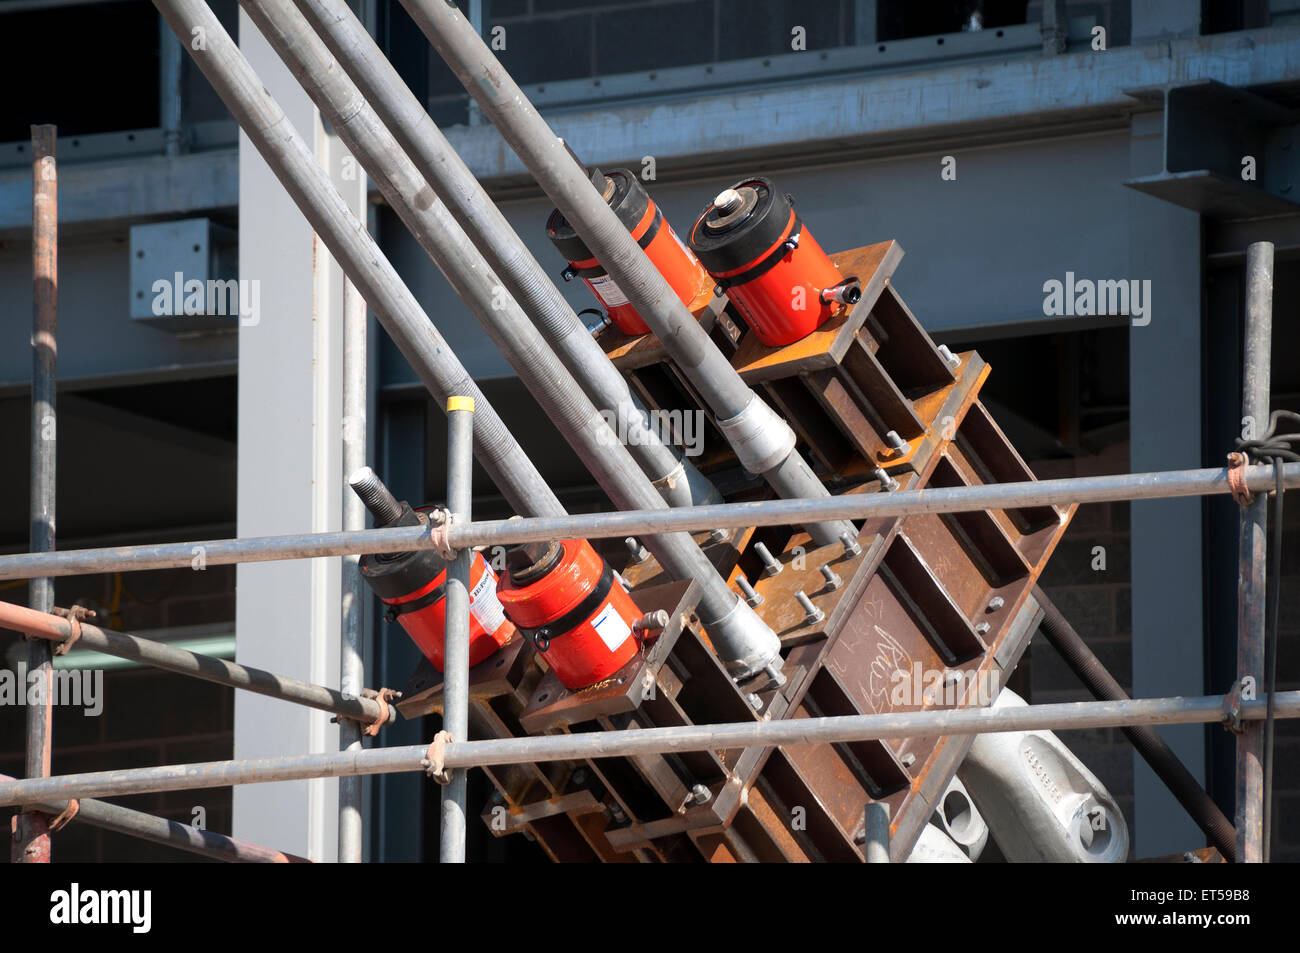 Clamps and hydraulic jacks holding the support tie ropes for the new roof, Etihad Stadium South Stand, Manchester, England, UK Stock Photo